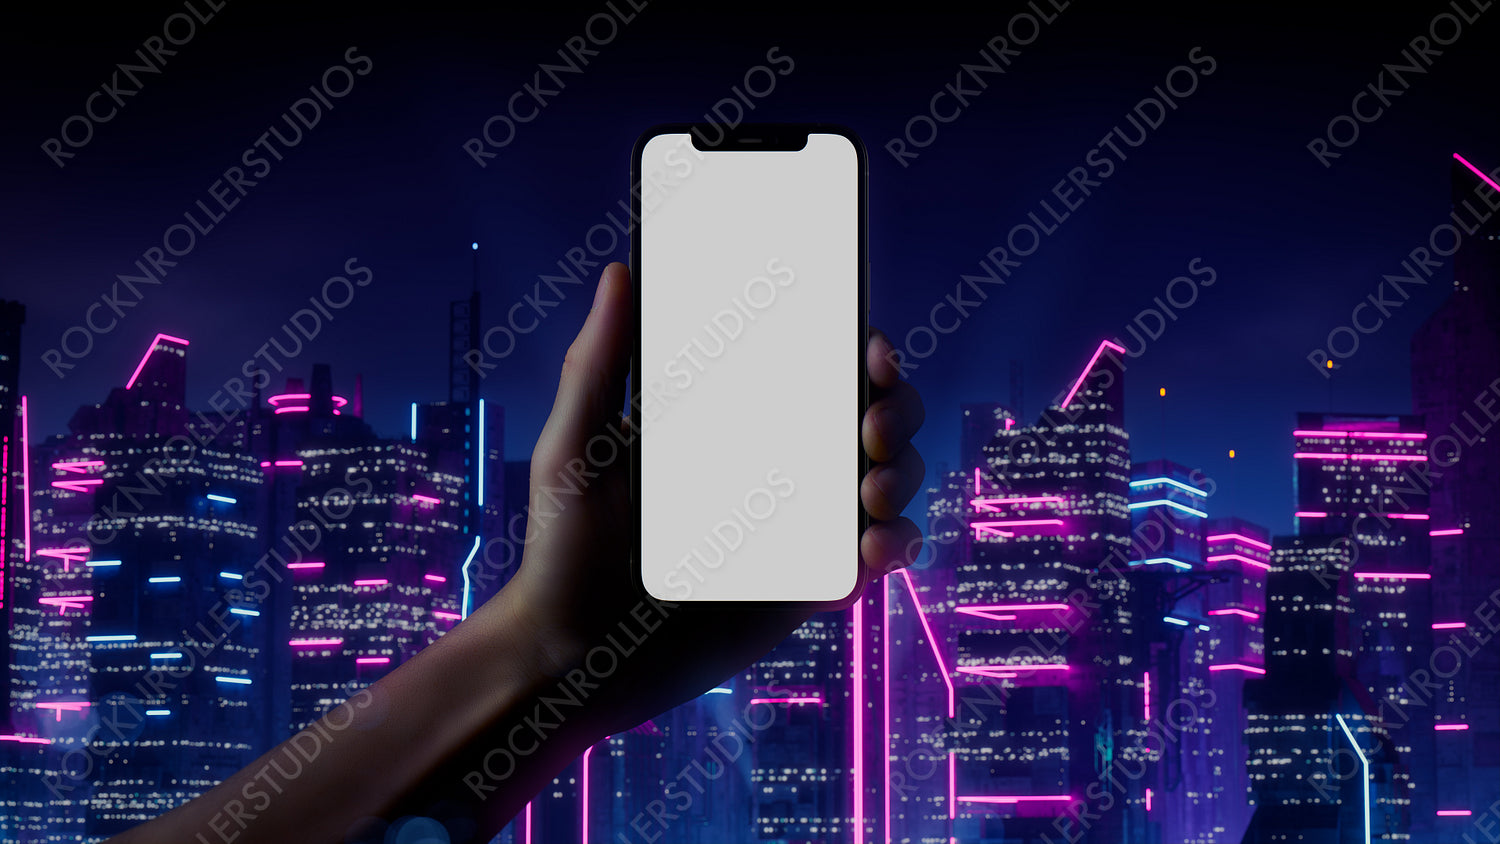 Futuristic Smartphone Template, with Blue and Pink neon City Skyline Backdrop.